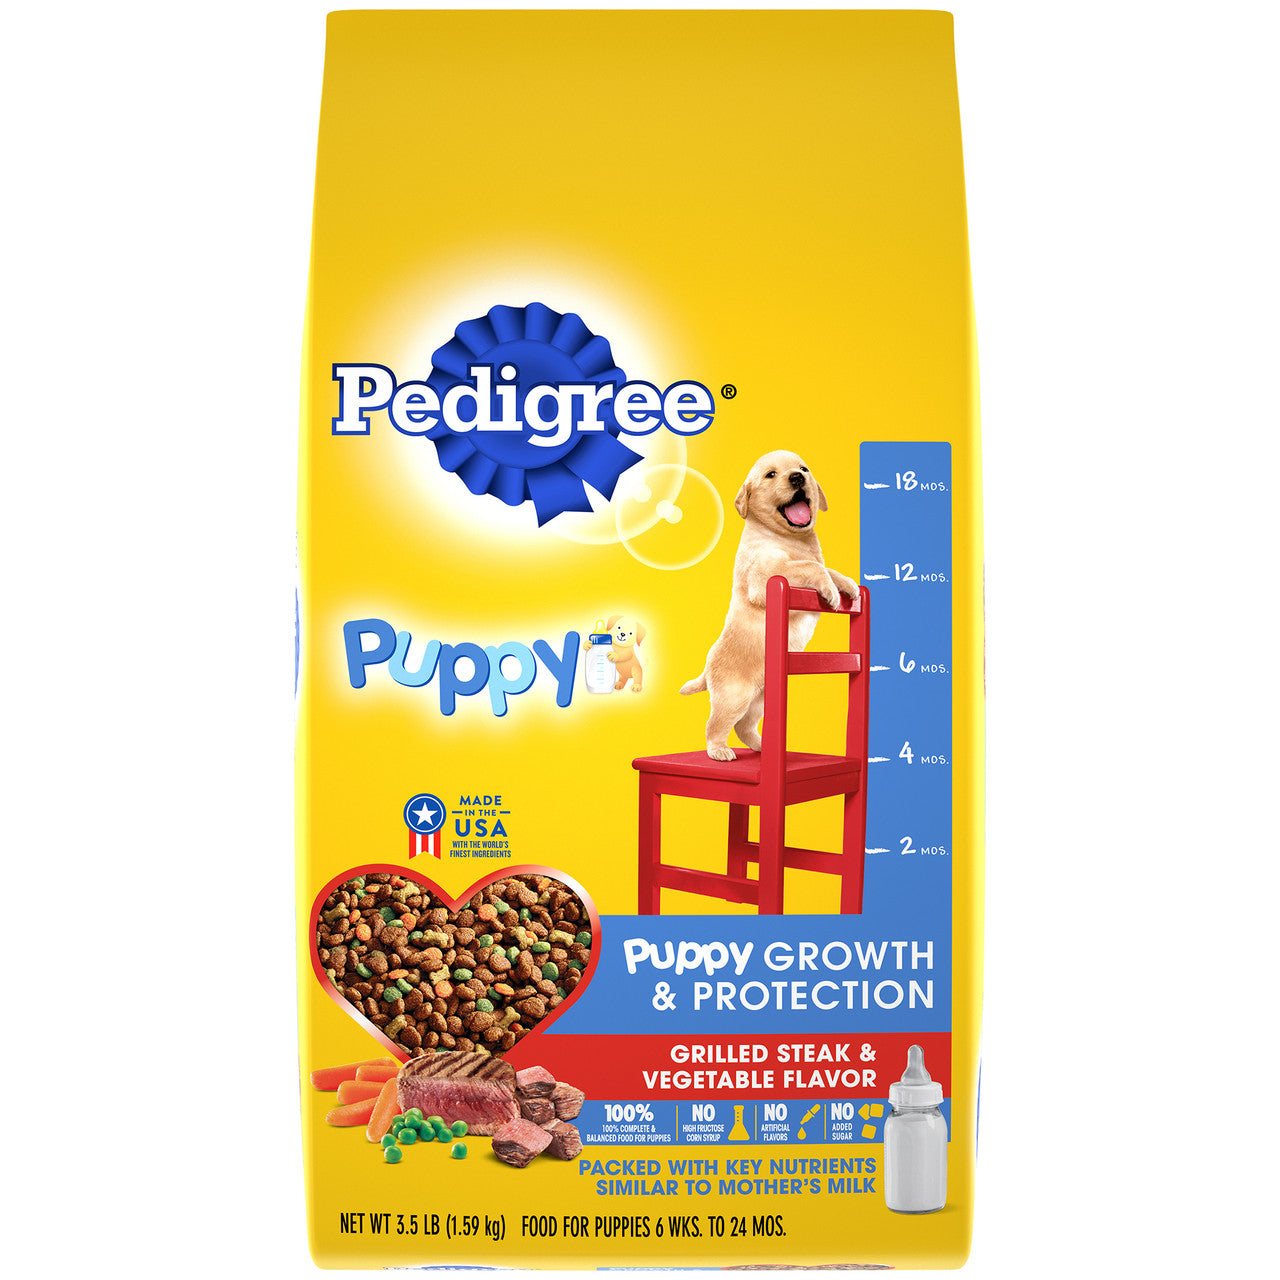 Pedigree Puppy Growth & Protection Dry Dog Food Grilled Steak & Vegetable 3.5lb